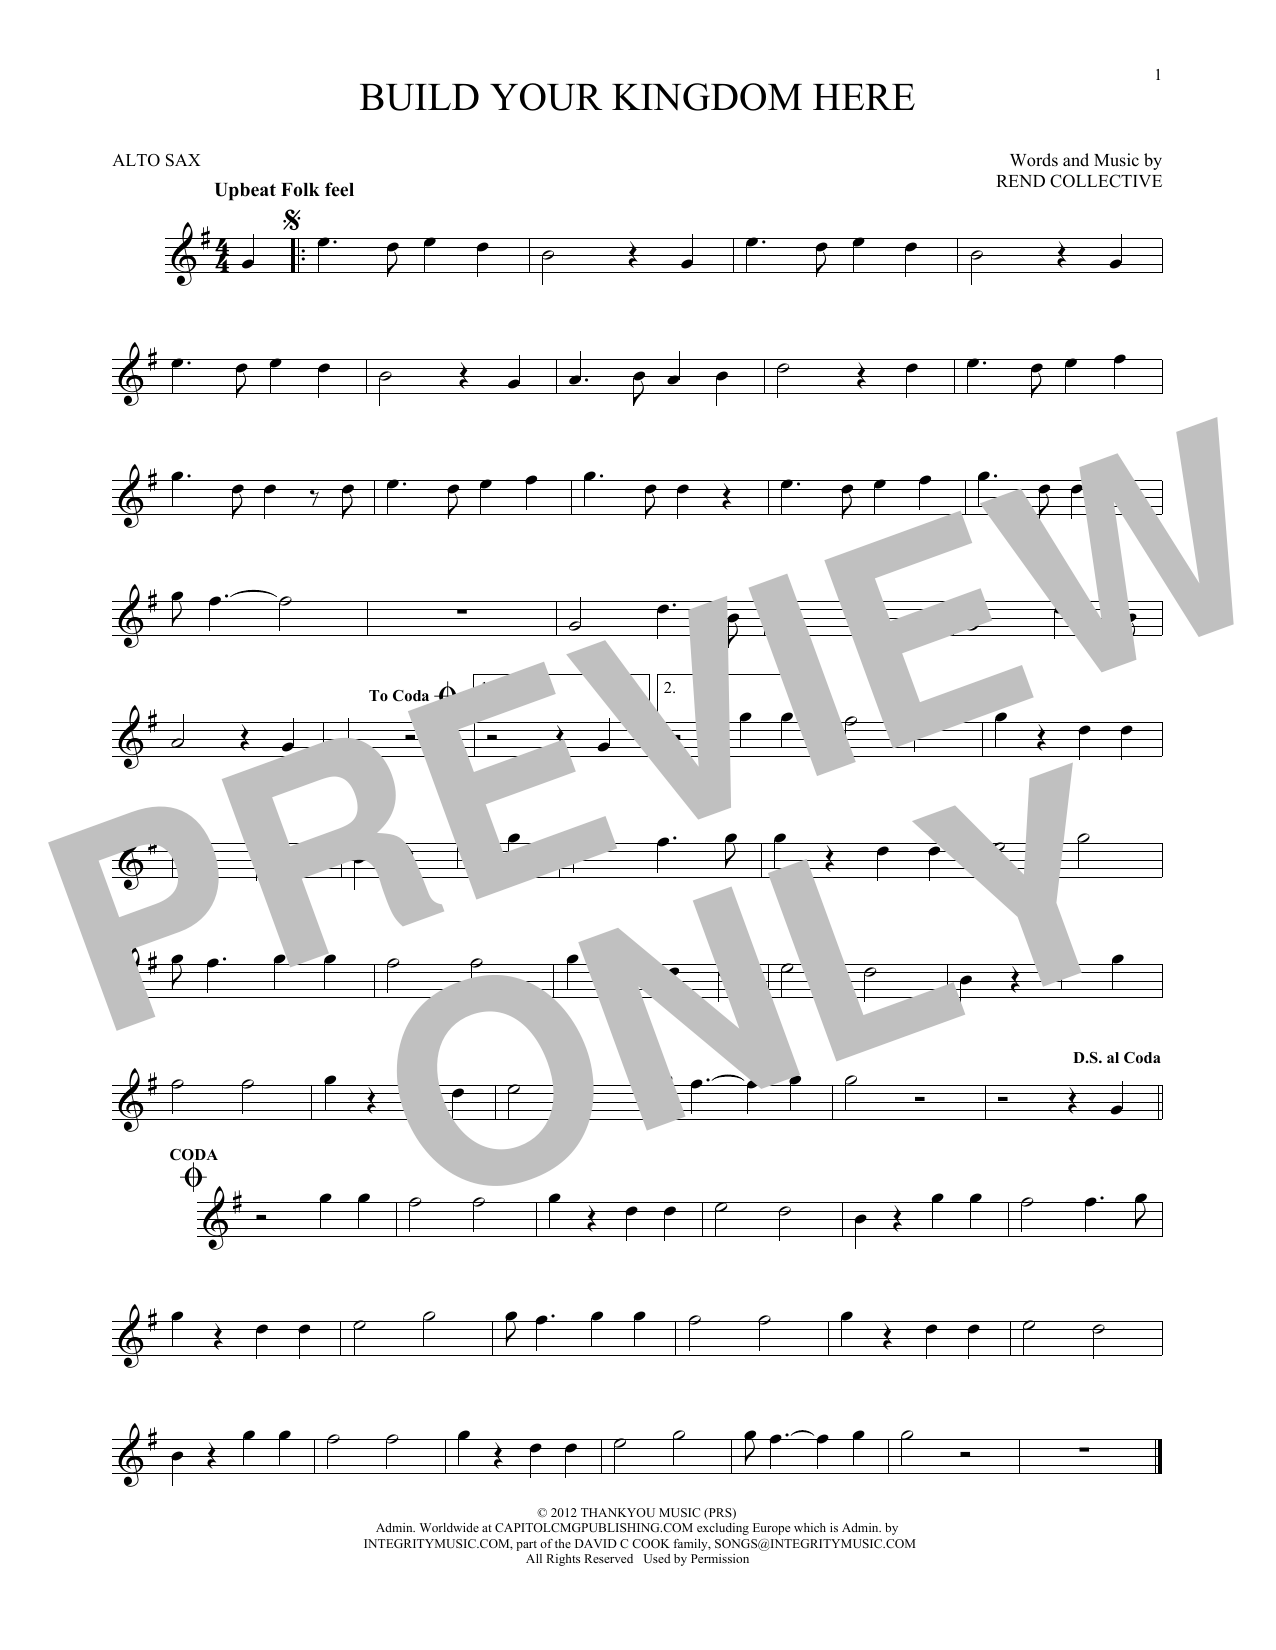 Rend Collective Build Your Kingdom Here sheet music notes printable PDF score